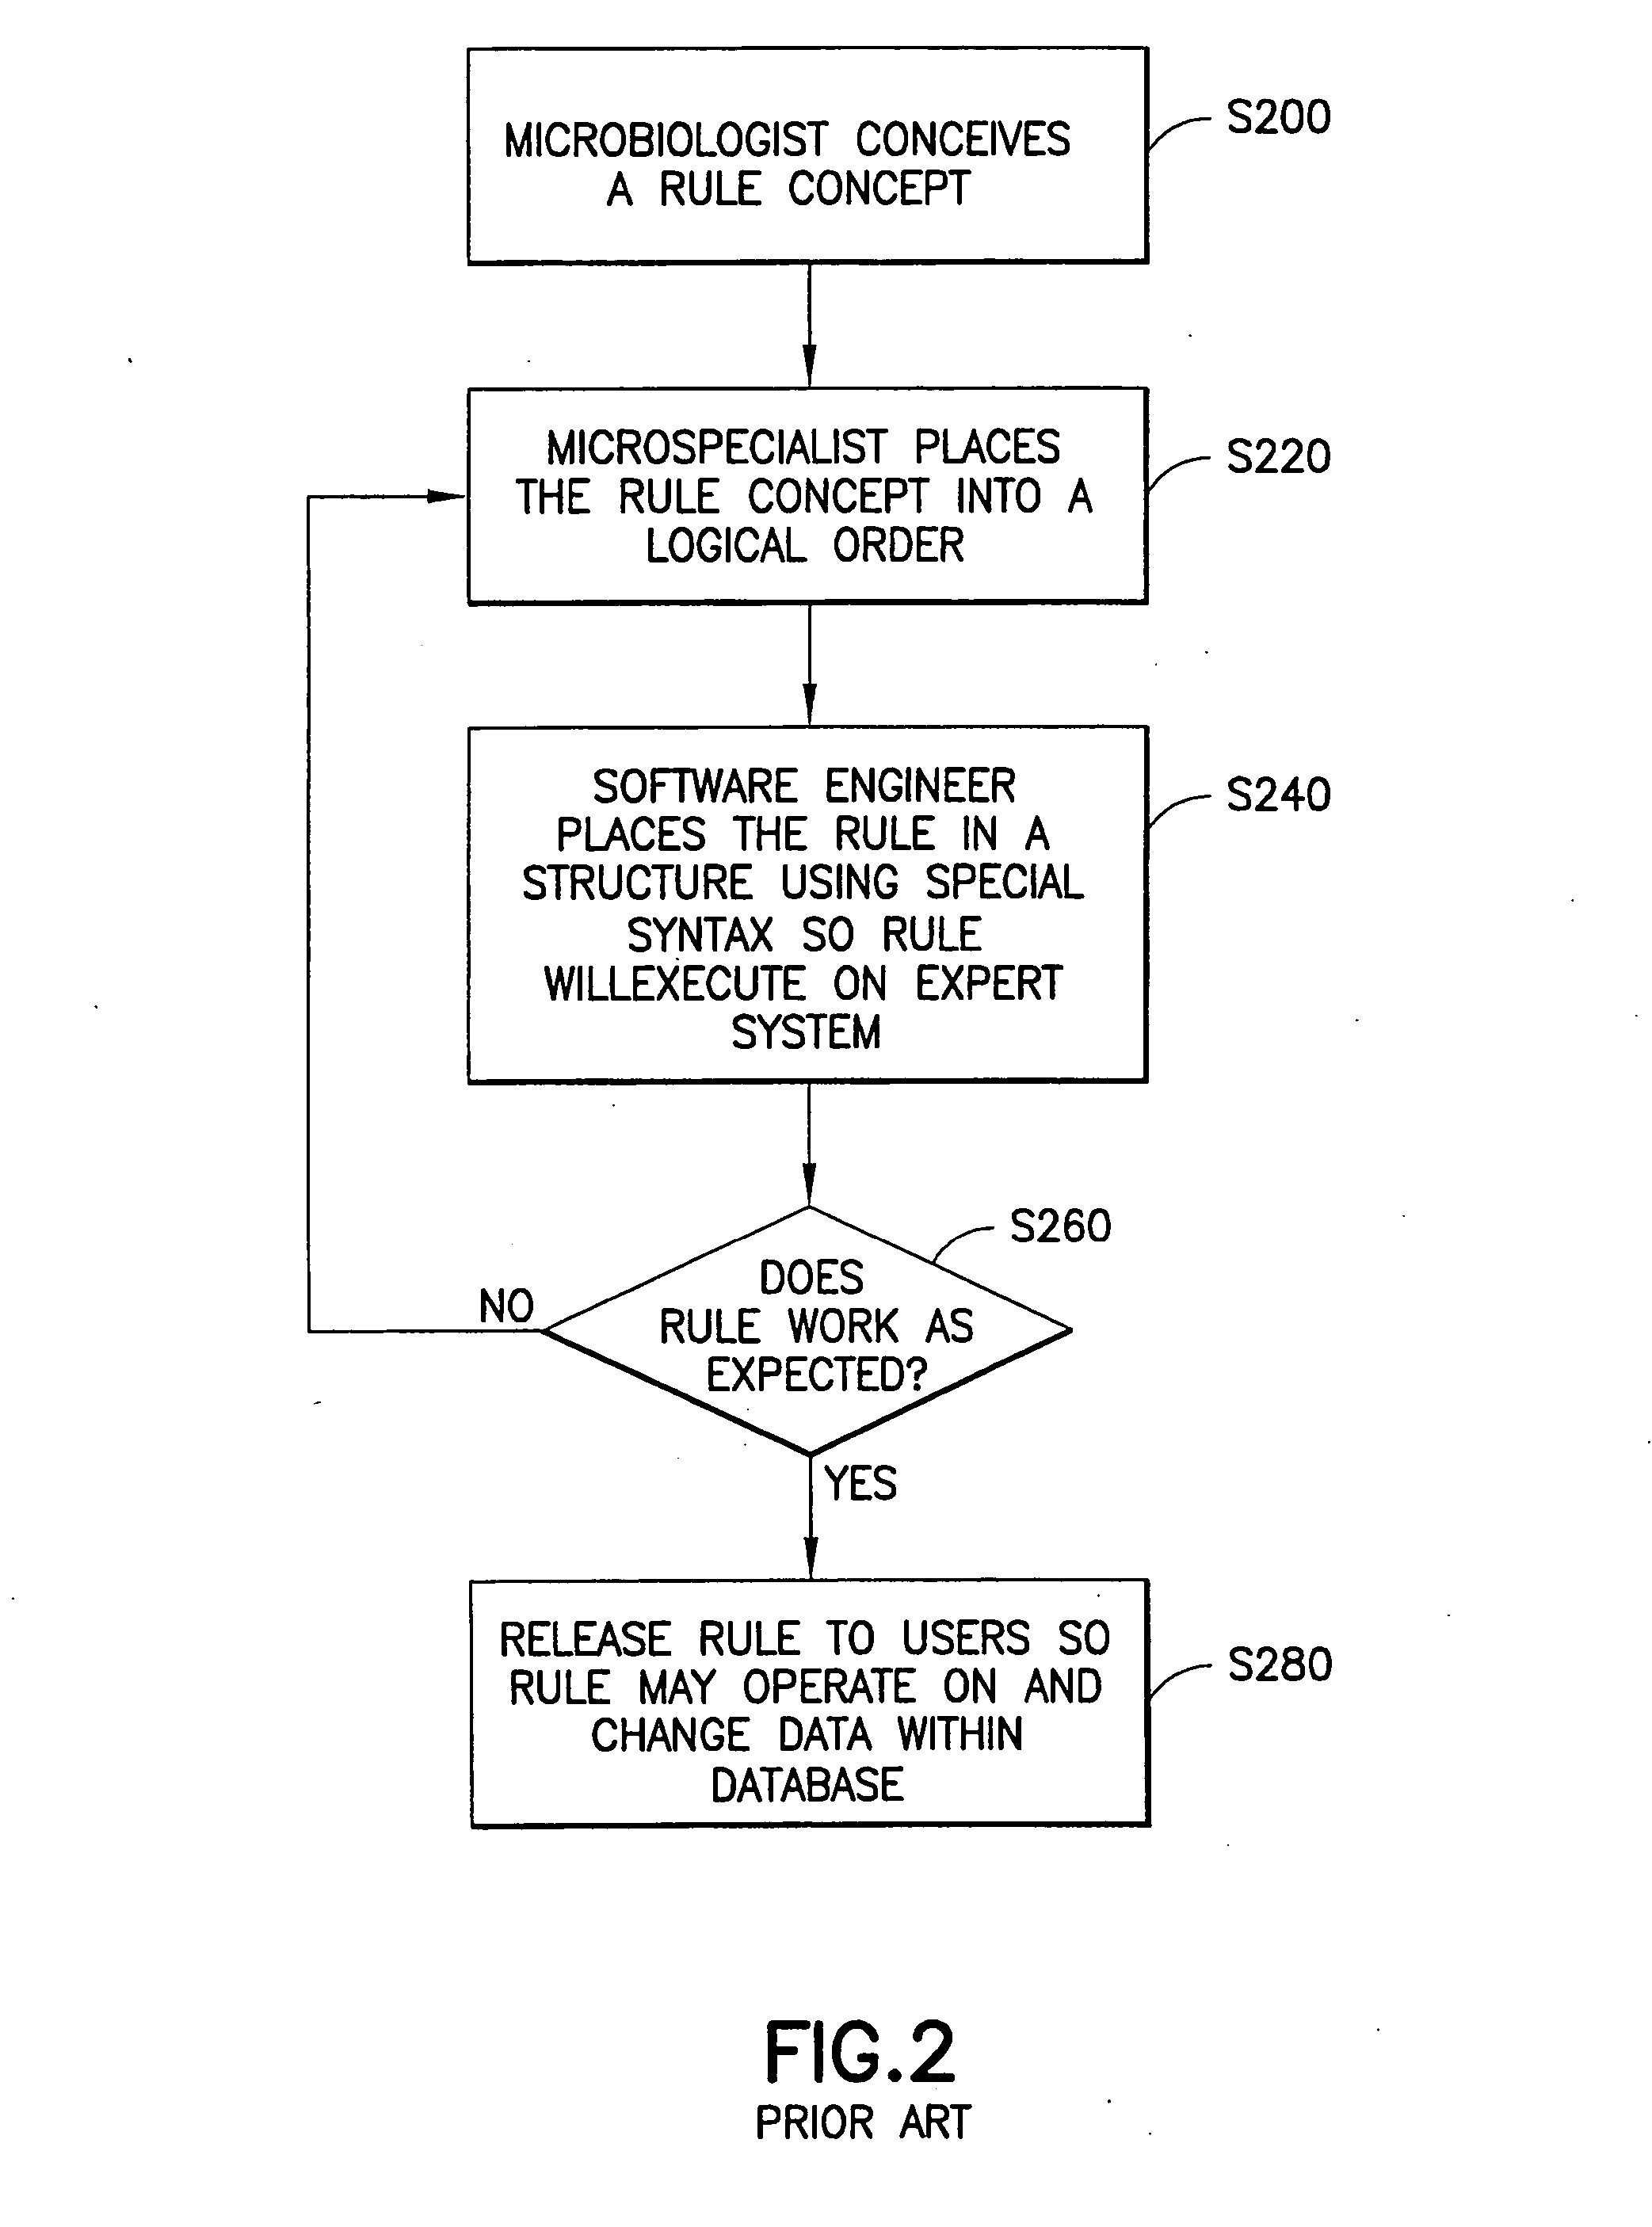 Graphical user interface for use with open expert system